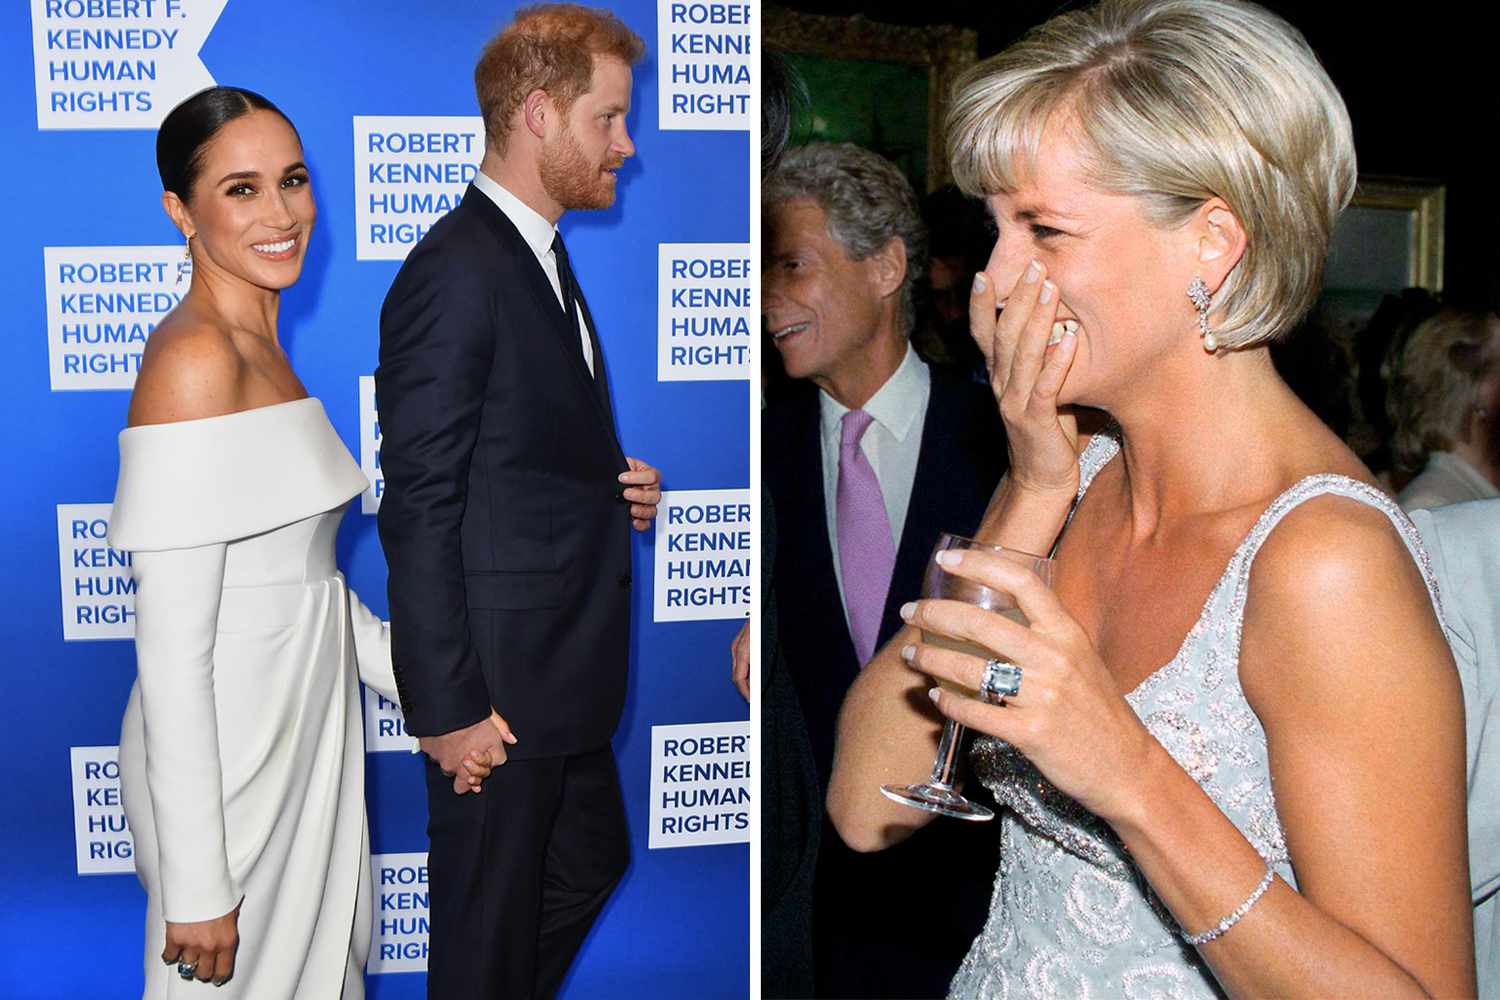 Pictured Left: Prince Harry, Duke of Sussex, and Meghan, Duchess of Sussex, arrive at the 2022 Robert F. Kennedy Human Rights Ripple of Hope Award Gala at the Hilton Midtown in New York City on December 6, 2022. Pictured right: JUNE 02: Diana, Princess Of Wales At The Christie's Pre-auction Party For The Launch Of The Auction Of Dresses. She Is Wearing A Dress By Fashion Designer Catherine Walker.